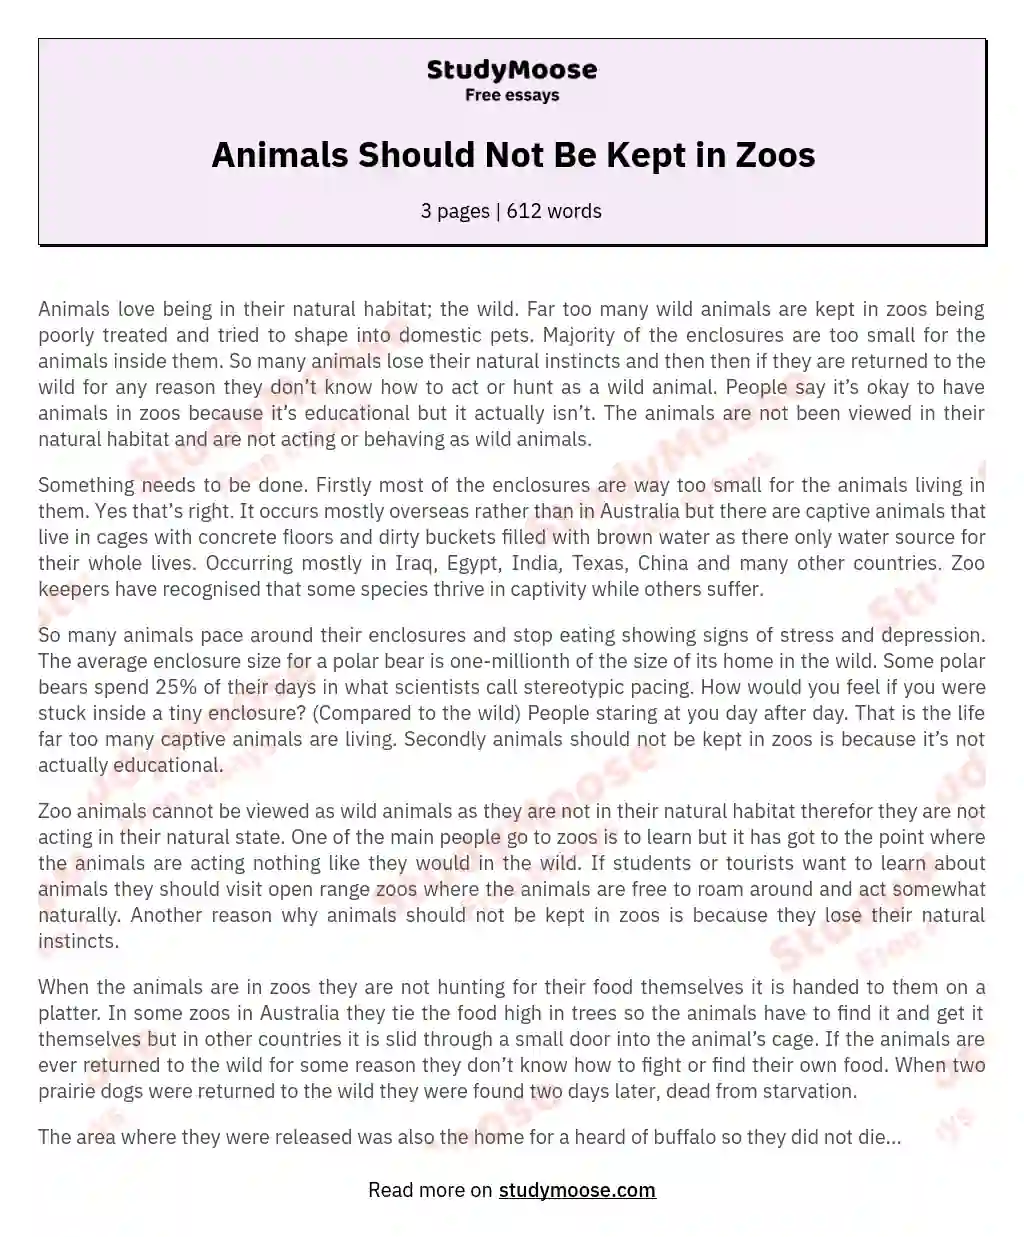 Animals Should Not Be Kept in Zoos essay